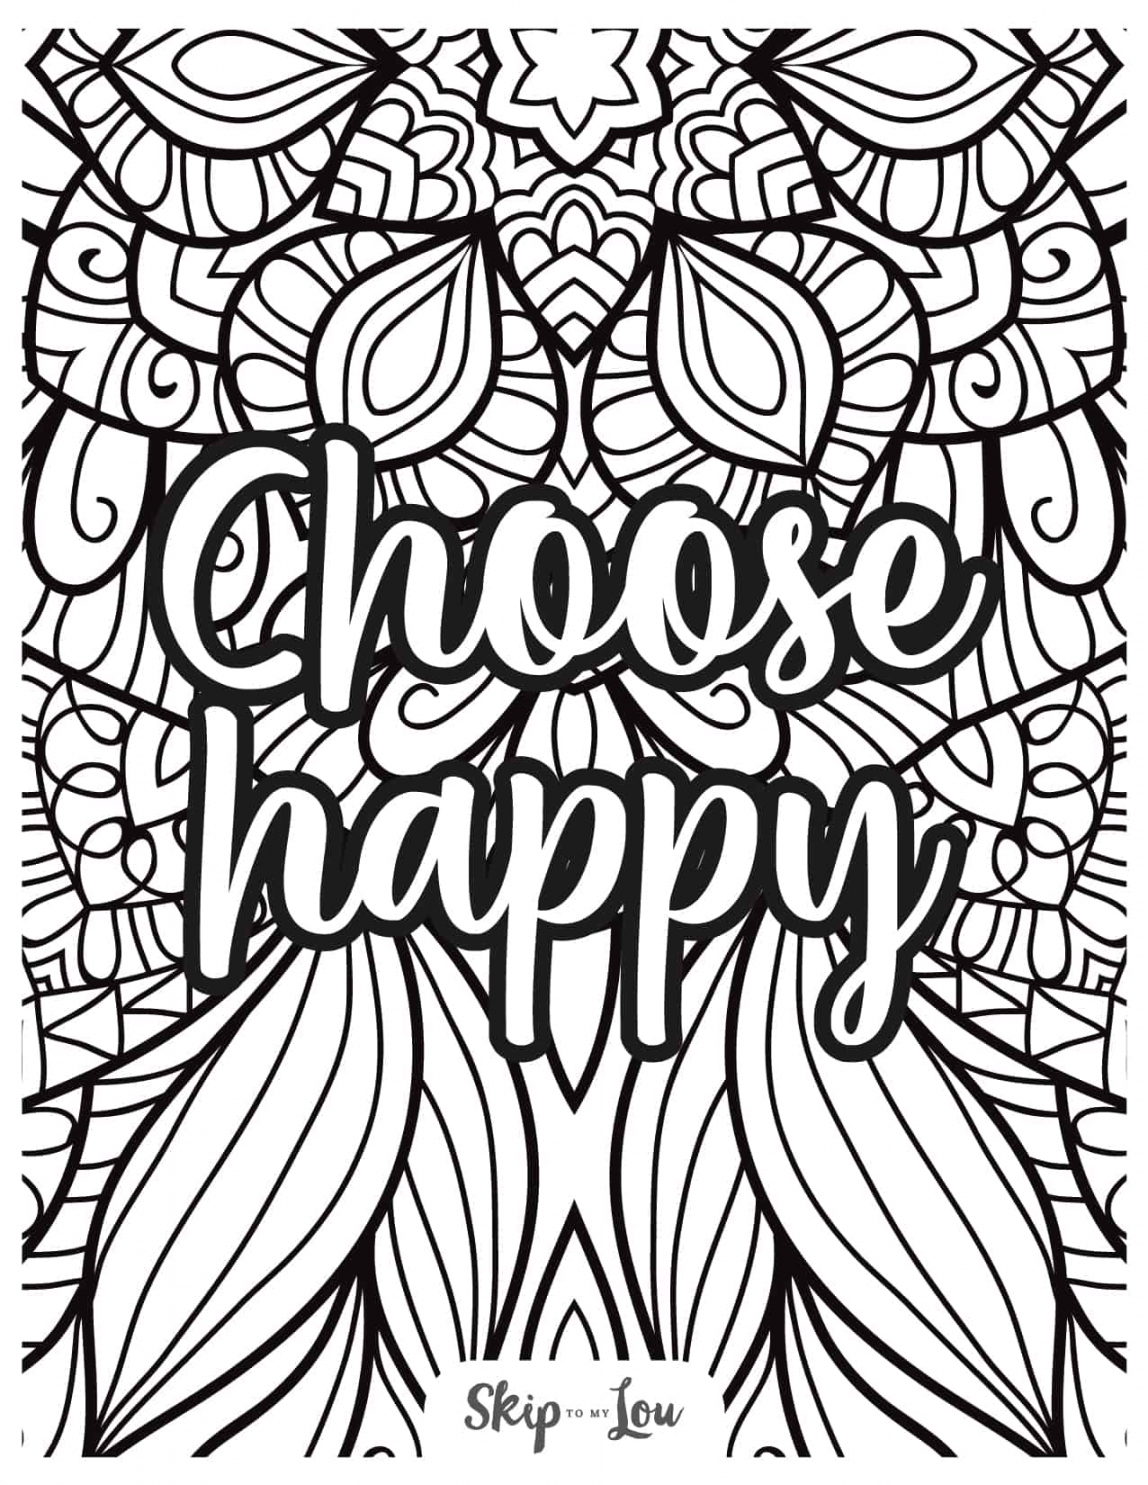 Coloring Pages Printable Free - Printable - Free Coloring Pages For Adults  Skip To My Lou